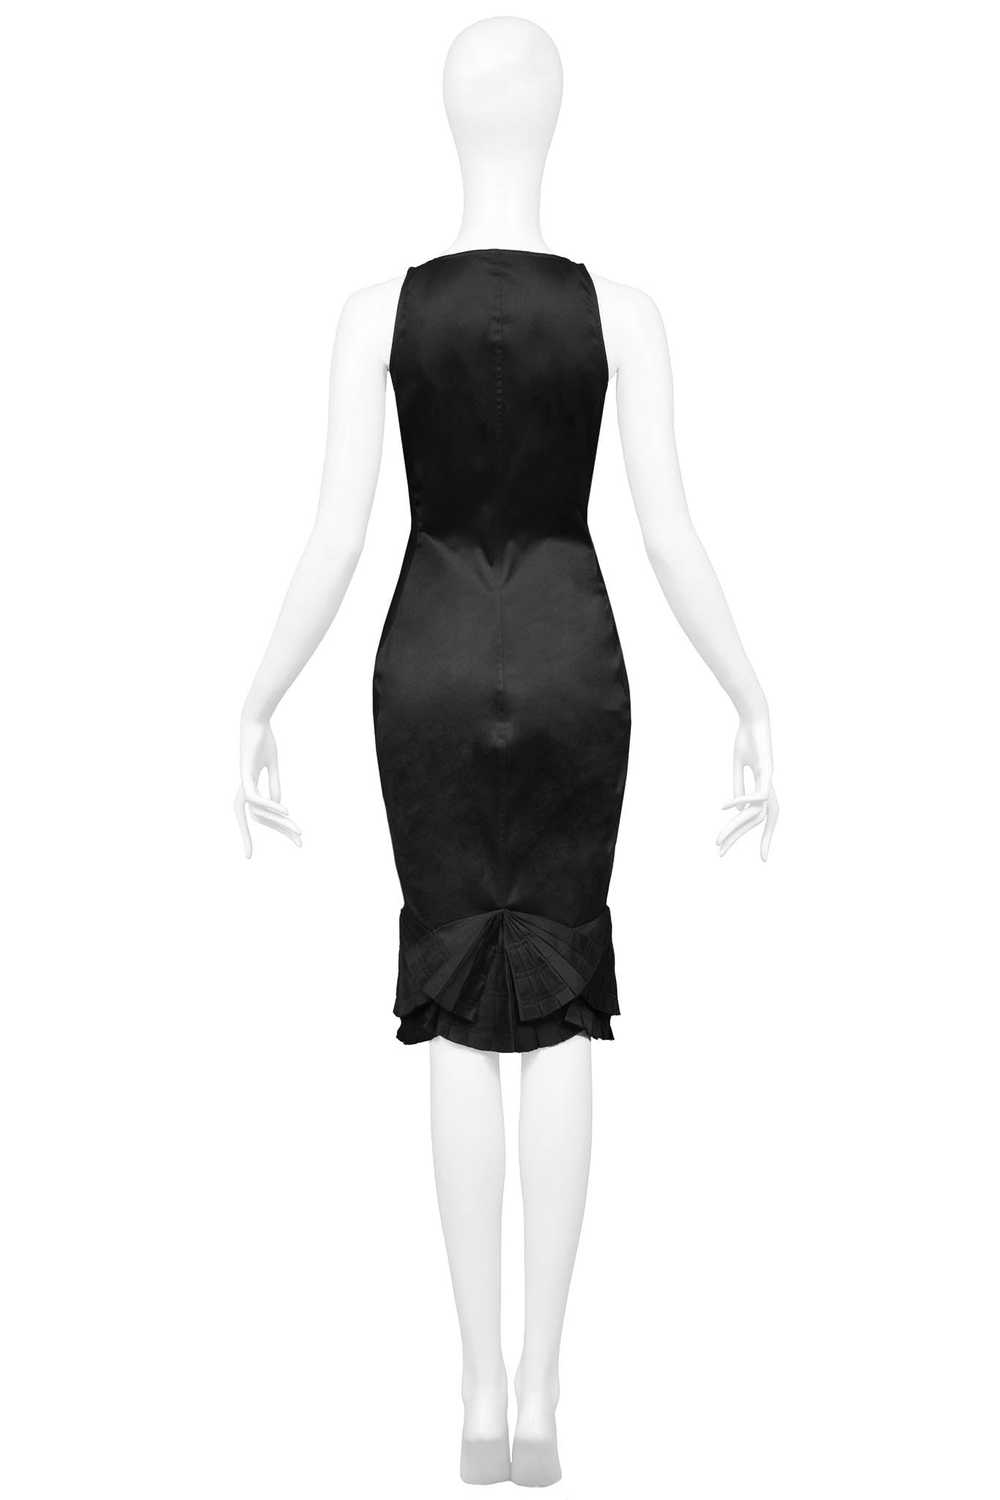 GUCCI BY TOM FORD BLACK DRESS WITH BACK PLEAT FAN… - image 2